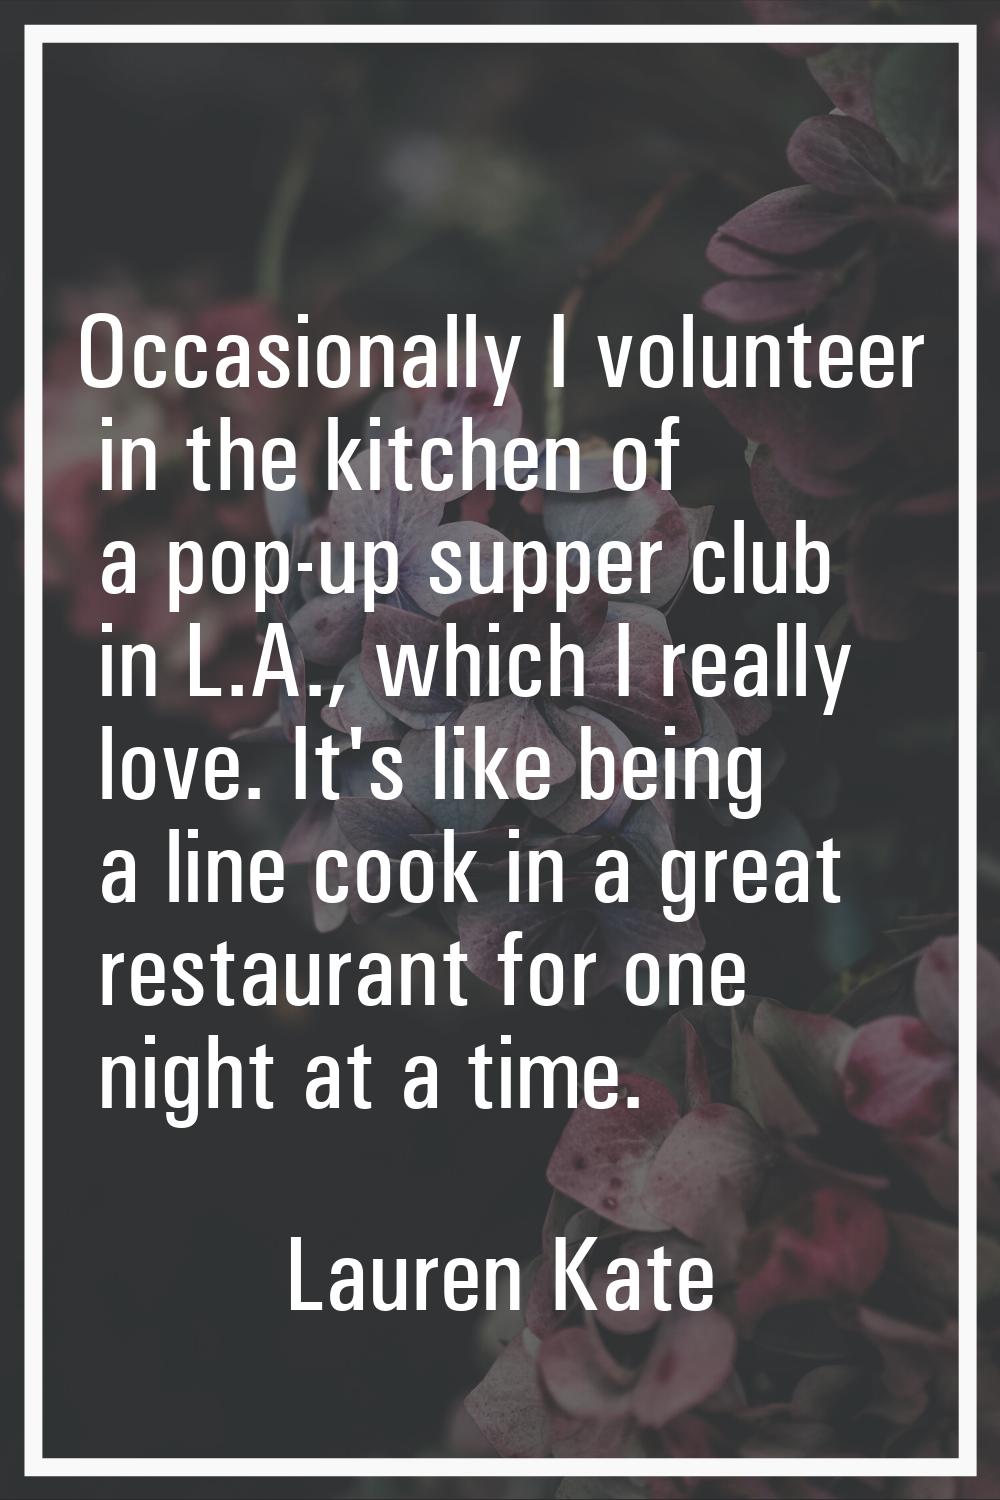 Occasionally I volunteer in the kitchen of a pop-up supper club in L.A., which I really love. It's 